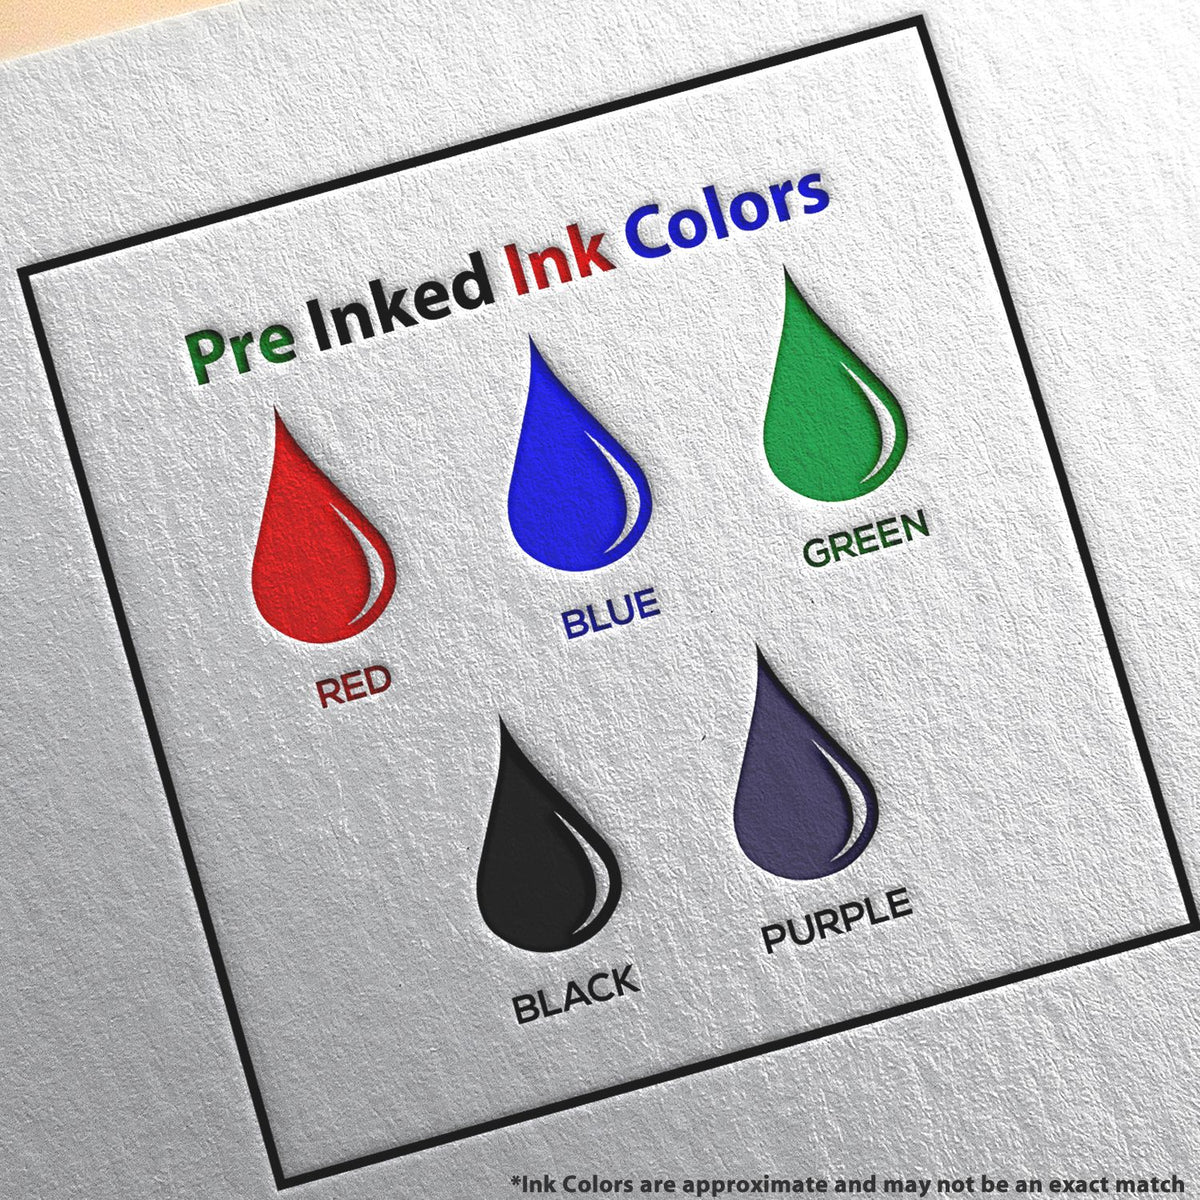 A picture showing the different ink colors or hues available for the MaxLight Premium Pre-Inked Oklahoma State Seal Notarial Stamp product.